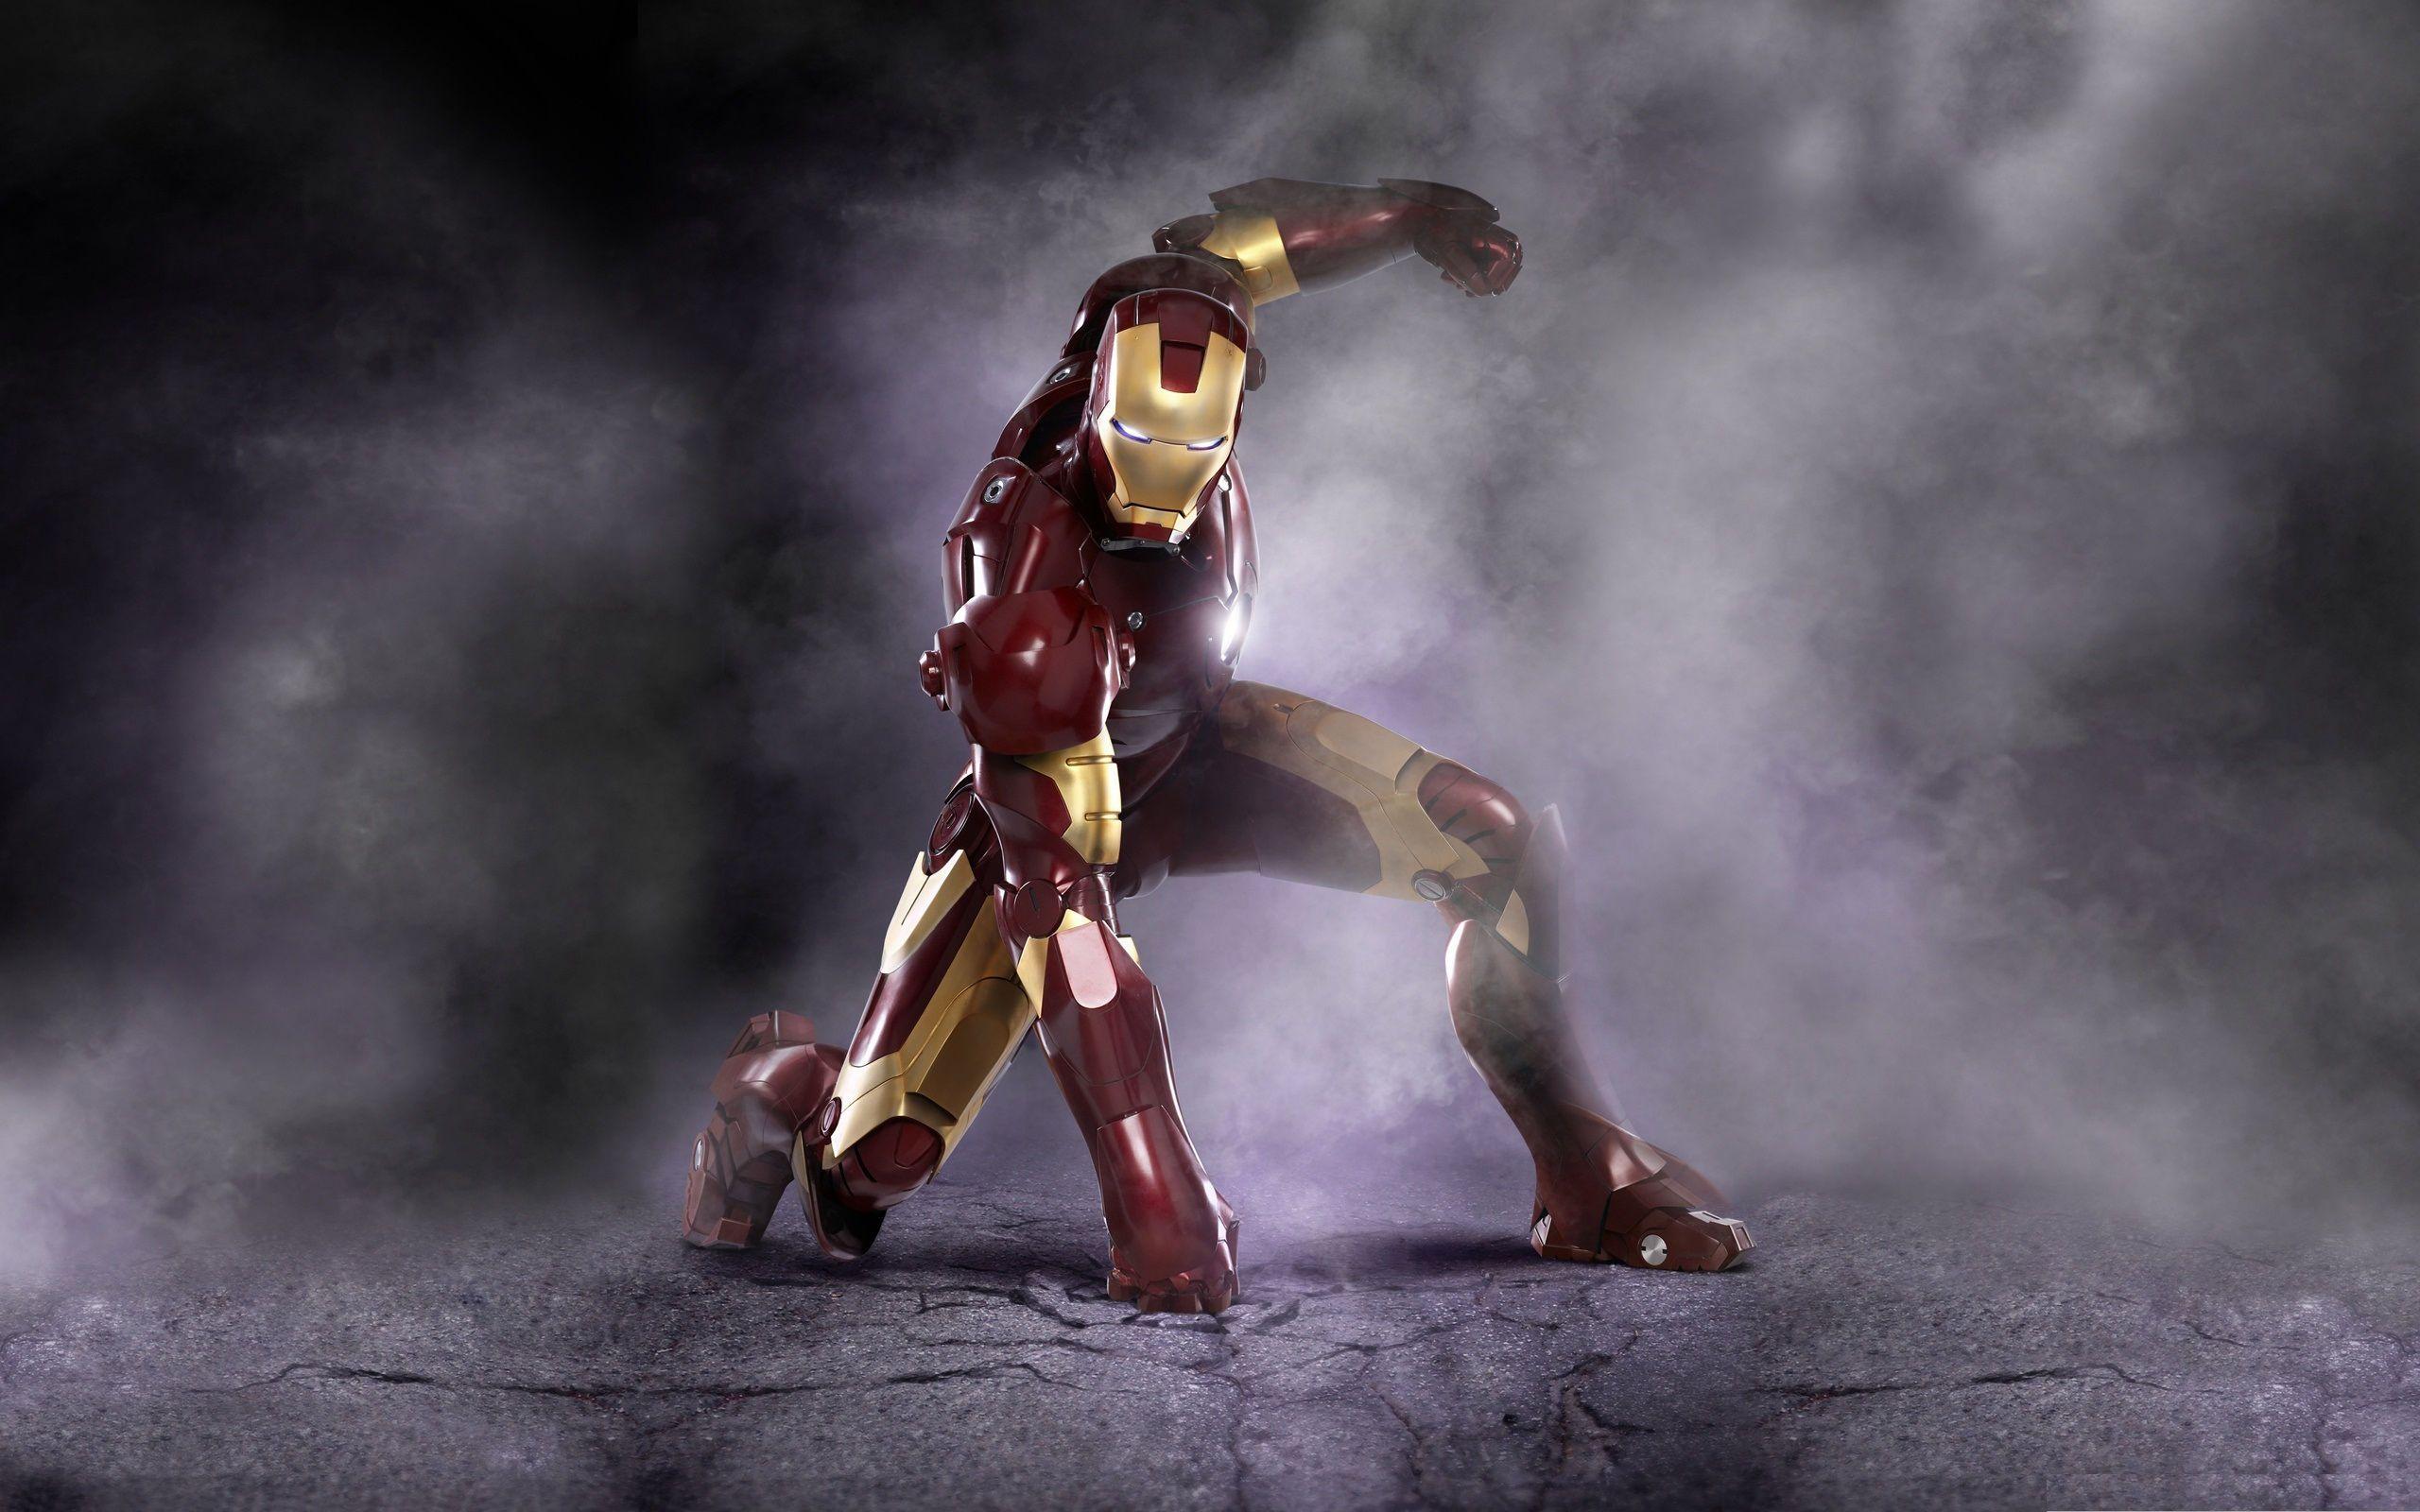 Cool Wallpaper with Iron Man Poses After Landing in the Battle. HD